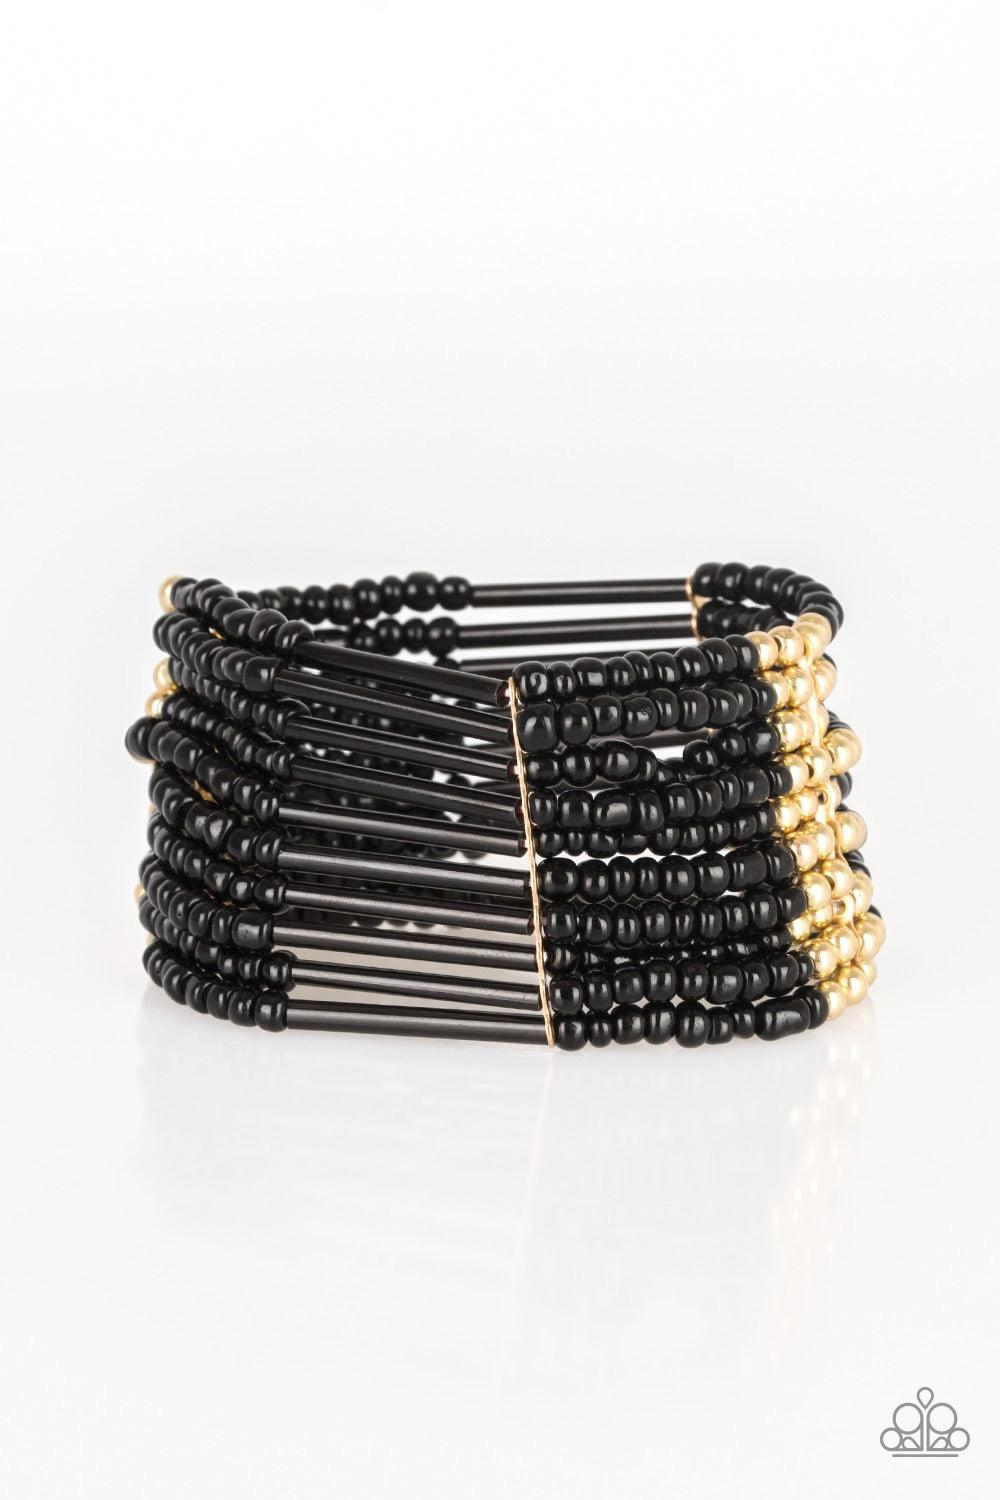 Paparazzi Accessories Rural Retreat - Gold Joined together with metallic fittings, black seed beads are threaded along stretchy elastic bands. Sections of gold beads are sprinkled along the edgy layers, adding hints of shimmer to the seasonal palette. Jew